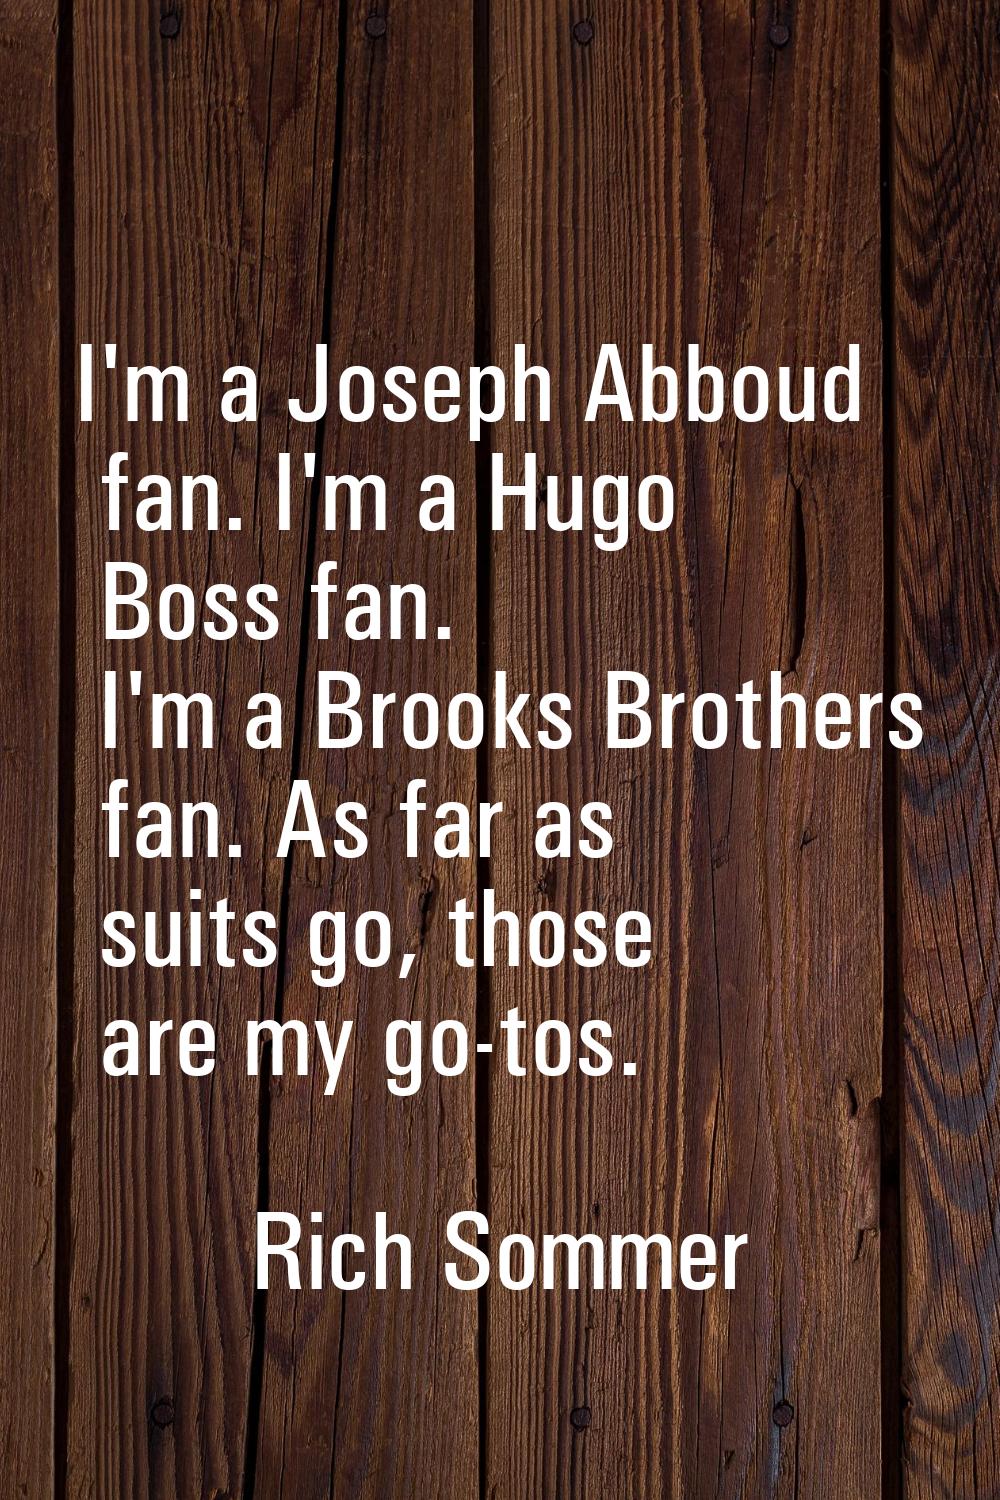 I'm a Joseph Abboud fan. I'm a Hugo Boss fan. I'm a Brooks Brothers fan. As far as suits go, those 